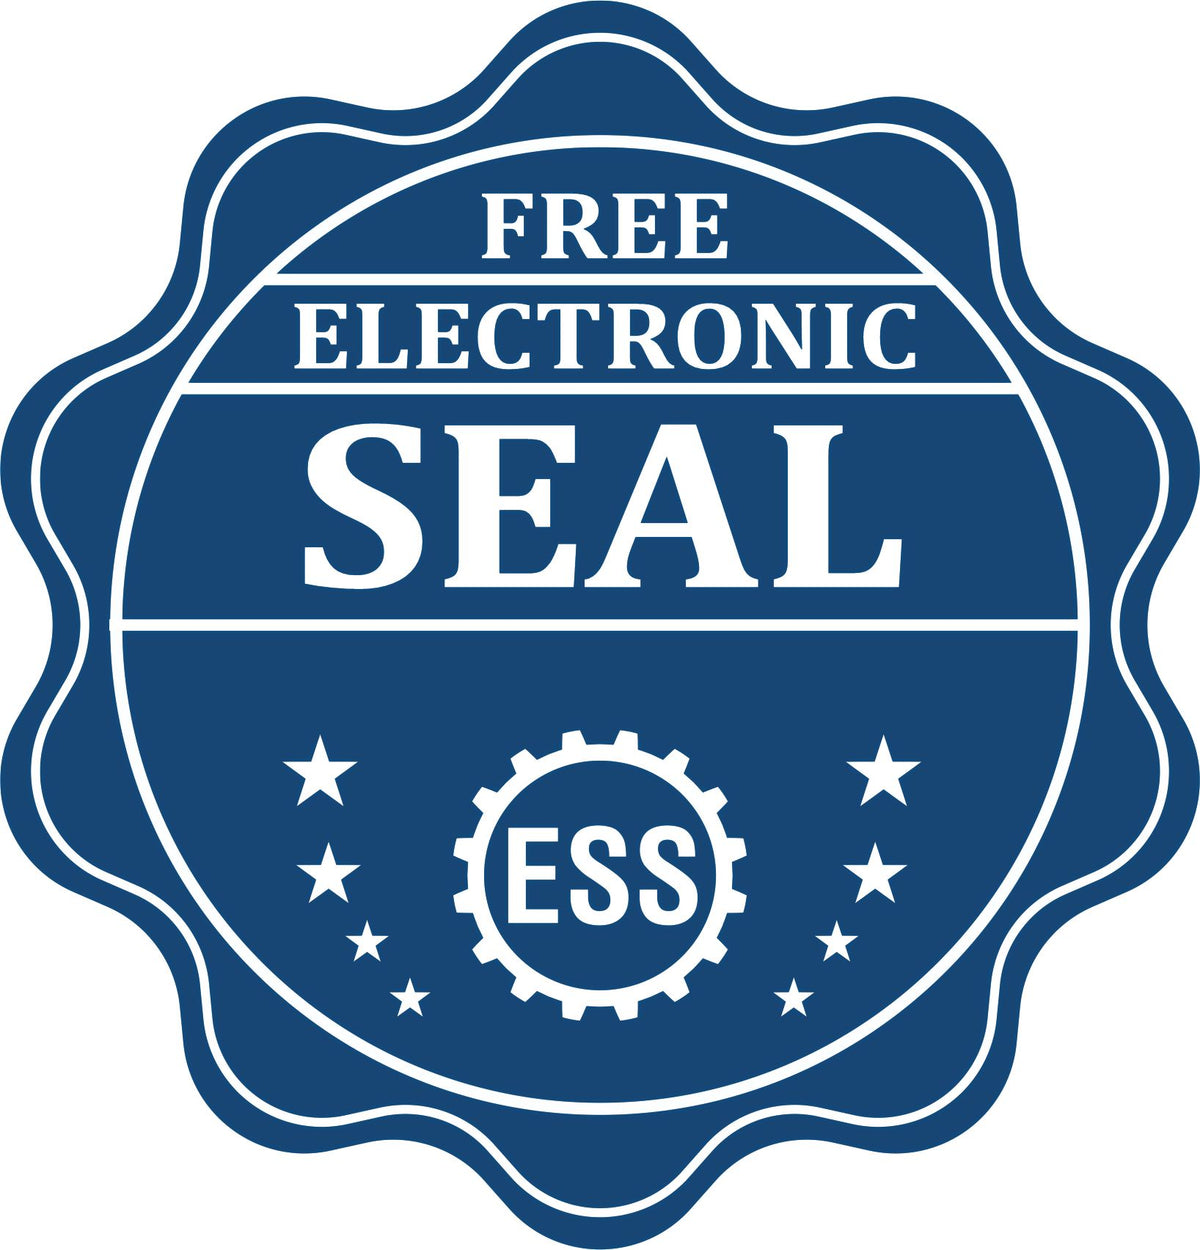 A badge showing a free electronic seal for the Premium MaxLight Pre-Inked Iowa Geology Stamp with stars and the ESS gear on the emblem.